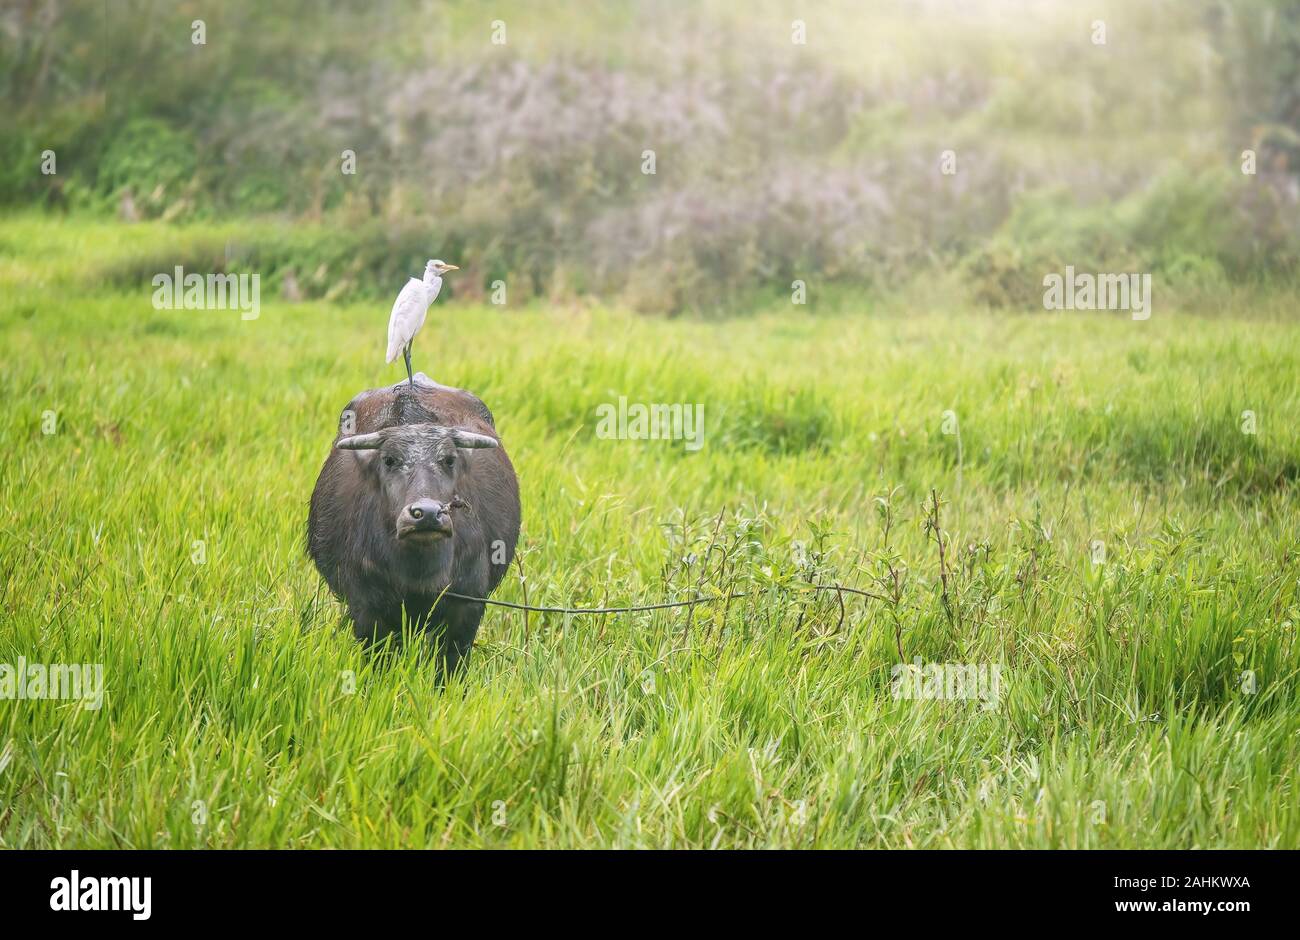 A carabao (Bubalus bubalis) standing in a field with a cattle egret on its back. This is the Philippines species of water buffalo. Stock Photo